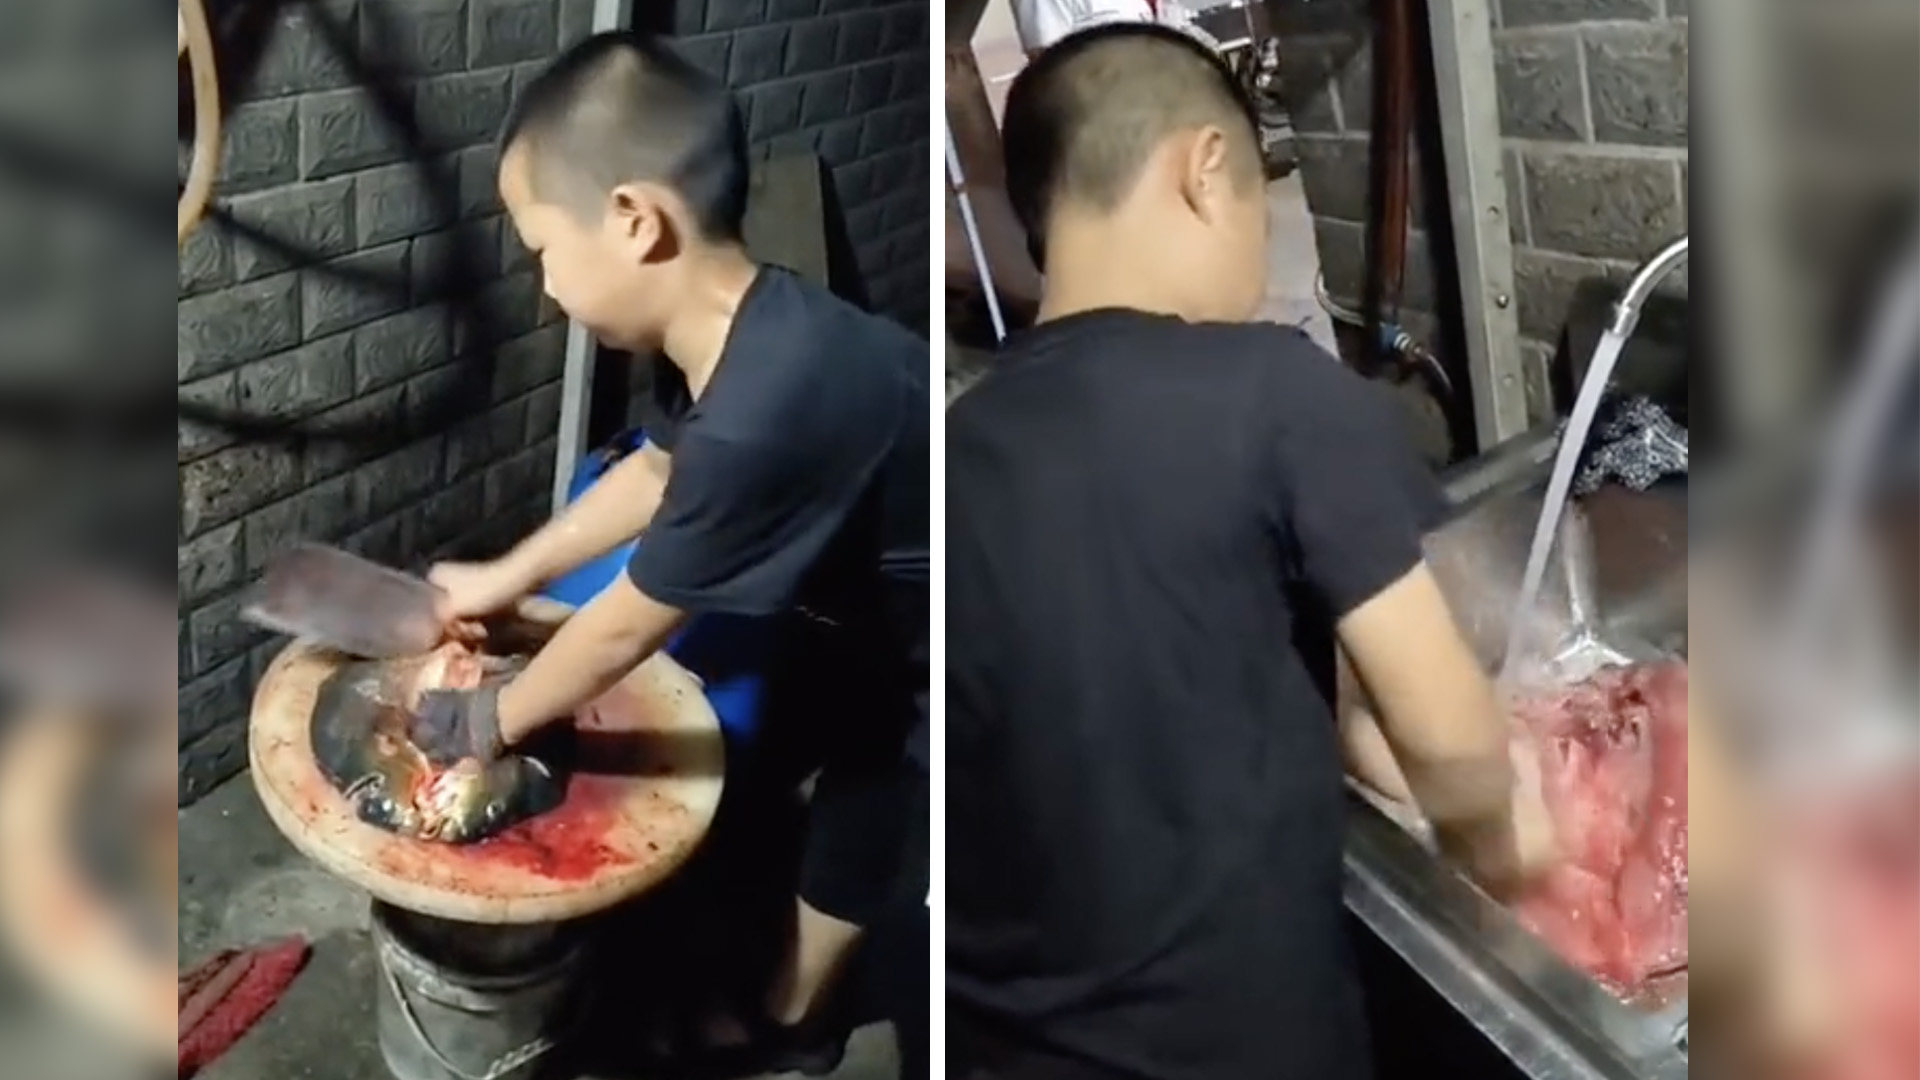 A boy filmed expertly cleaning fish has attracted praise for his skill online, but some have questioned if it is safe for a small child to handle knives. Photo: Douyin